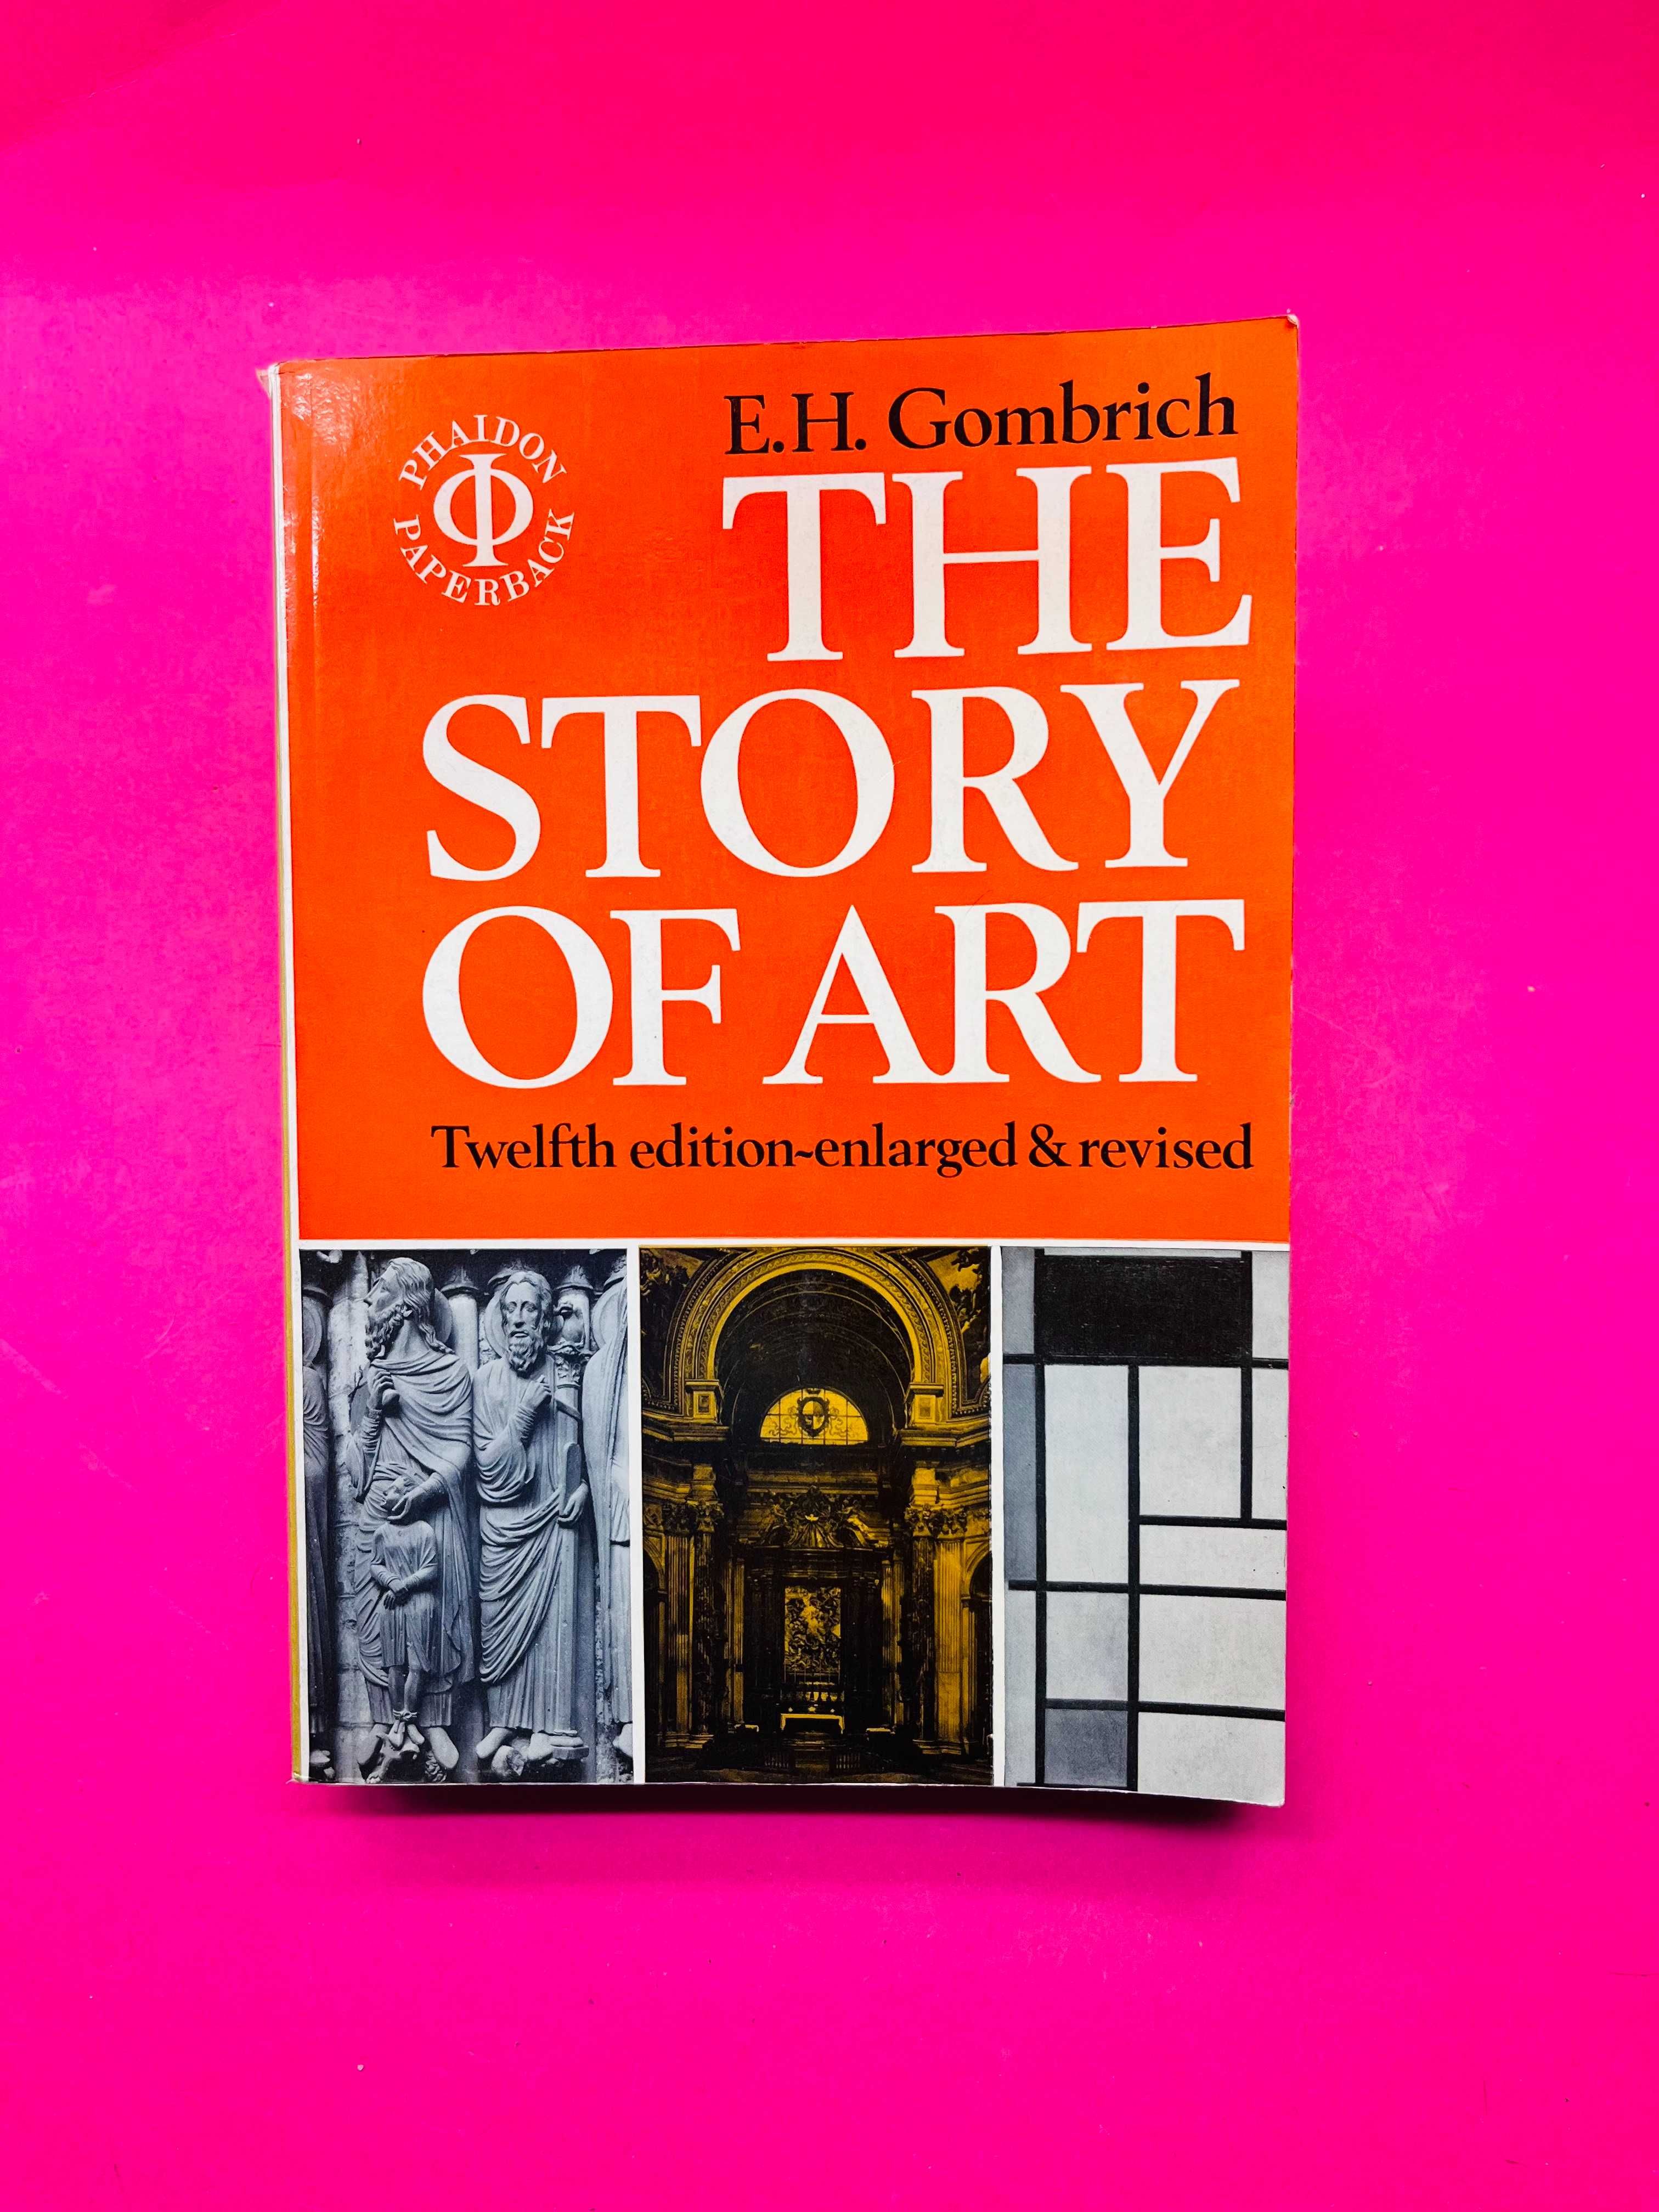 The Story of Art - E. H. Gombrich